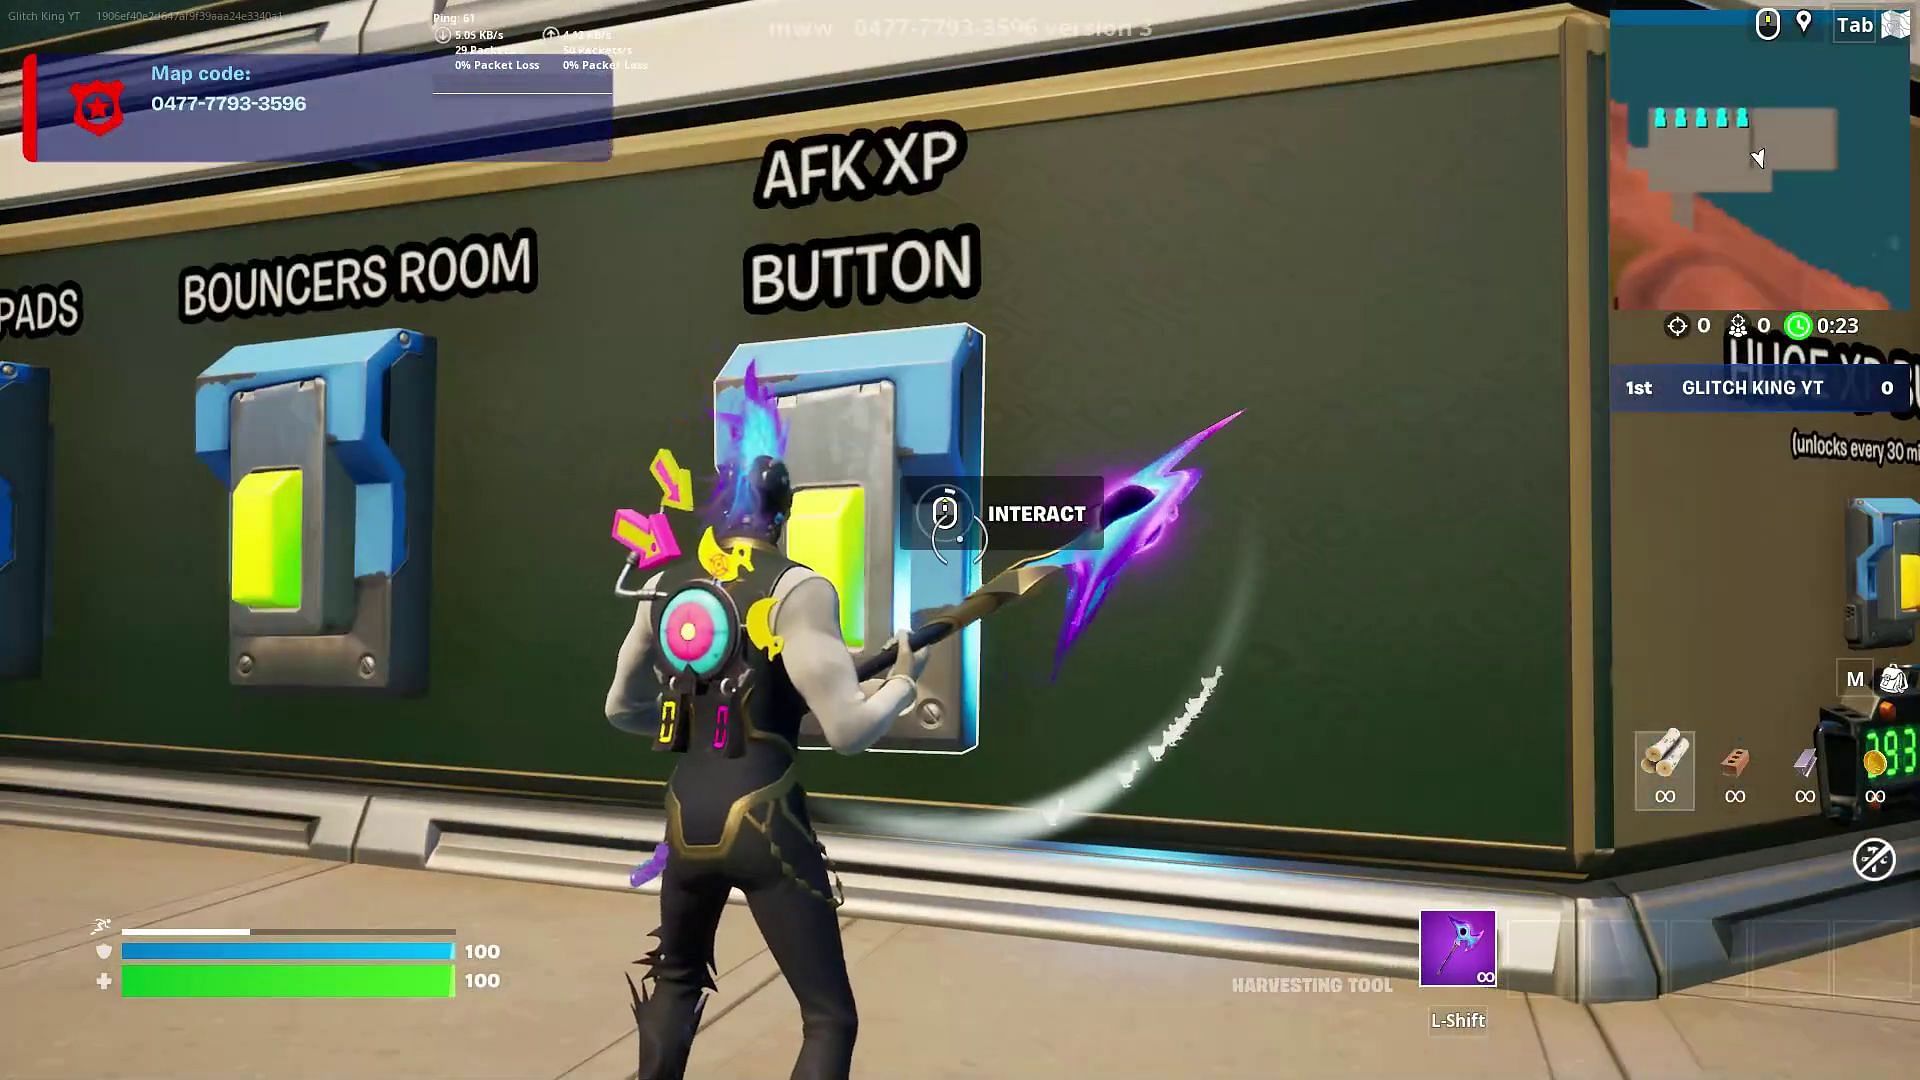 Interact with the AFK XP button to trigger the glitch. (Image via YouTube/GKI)